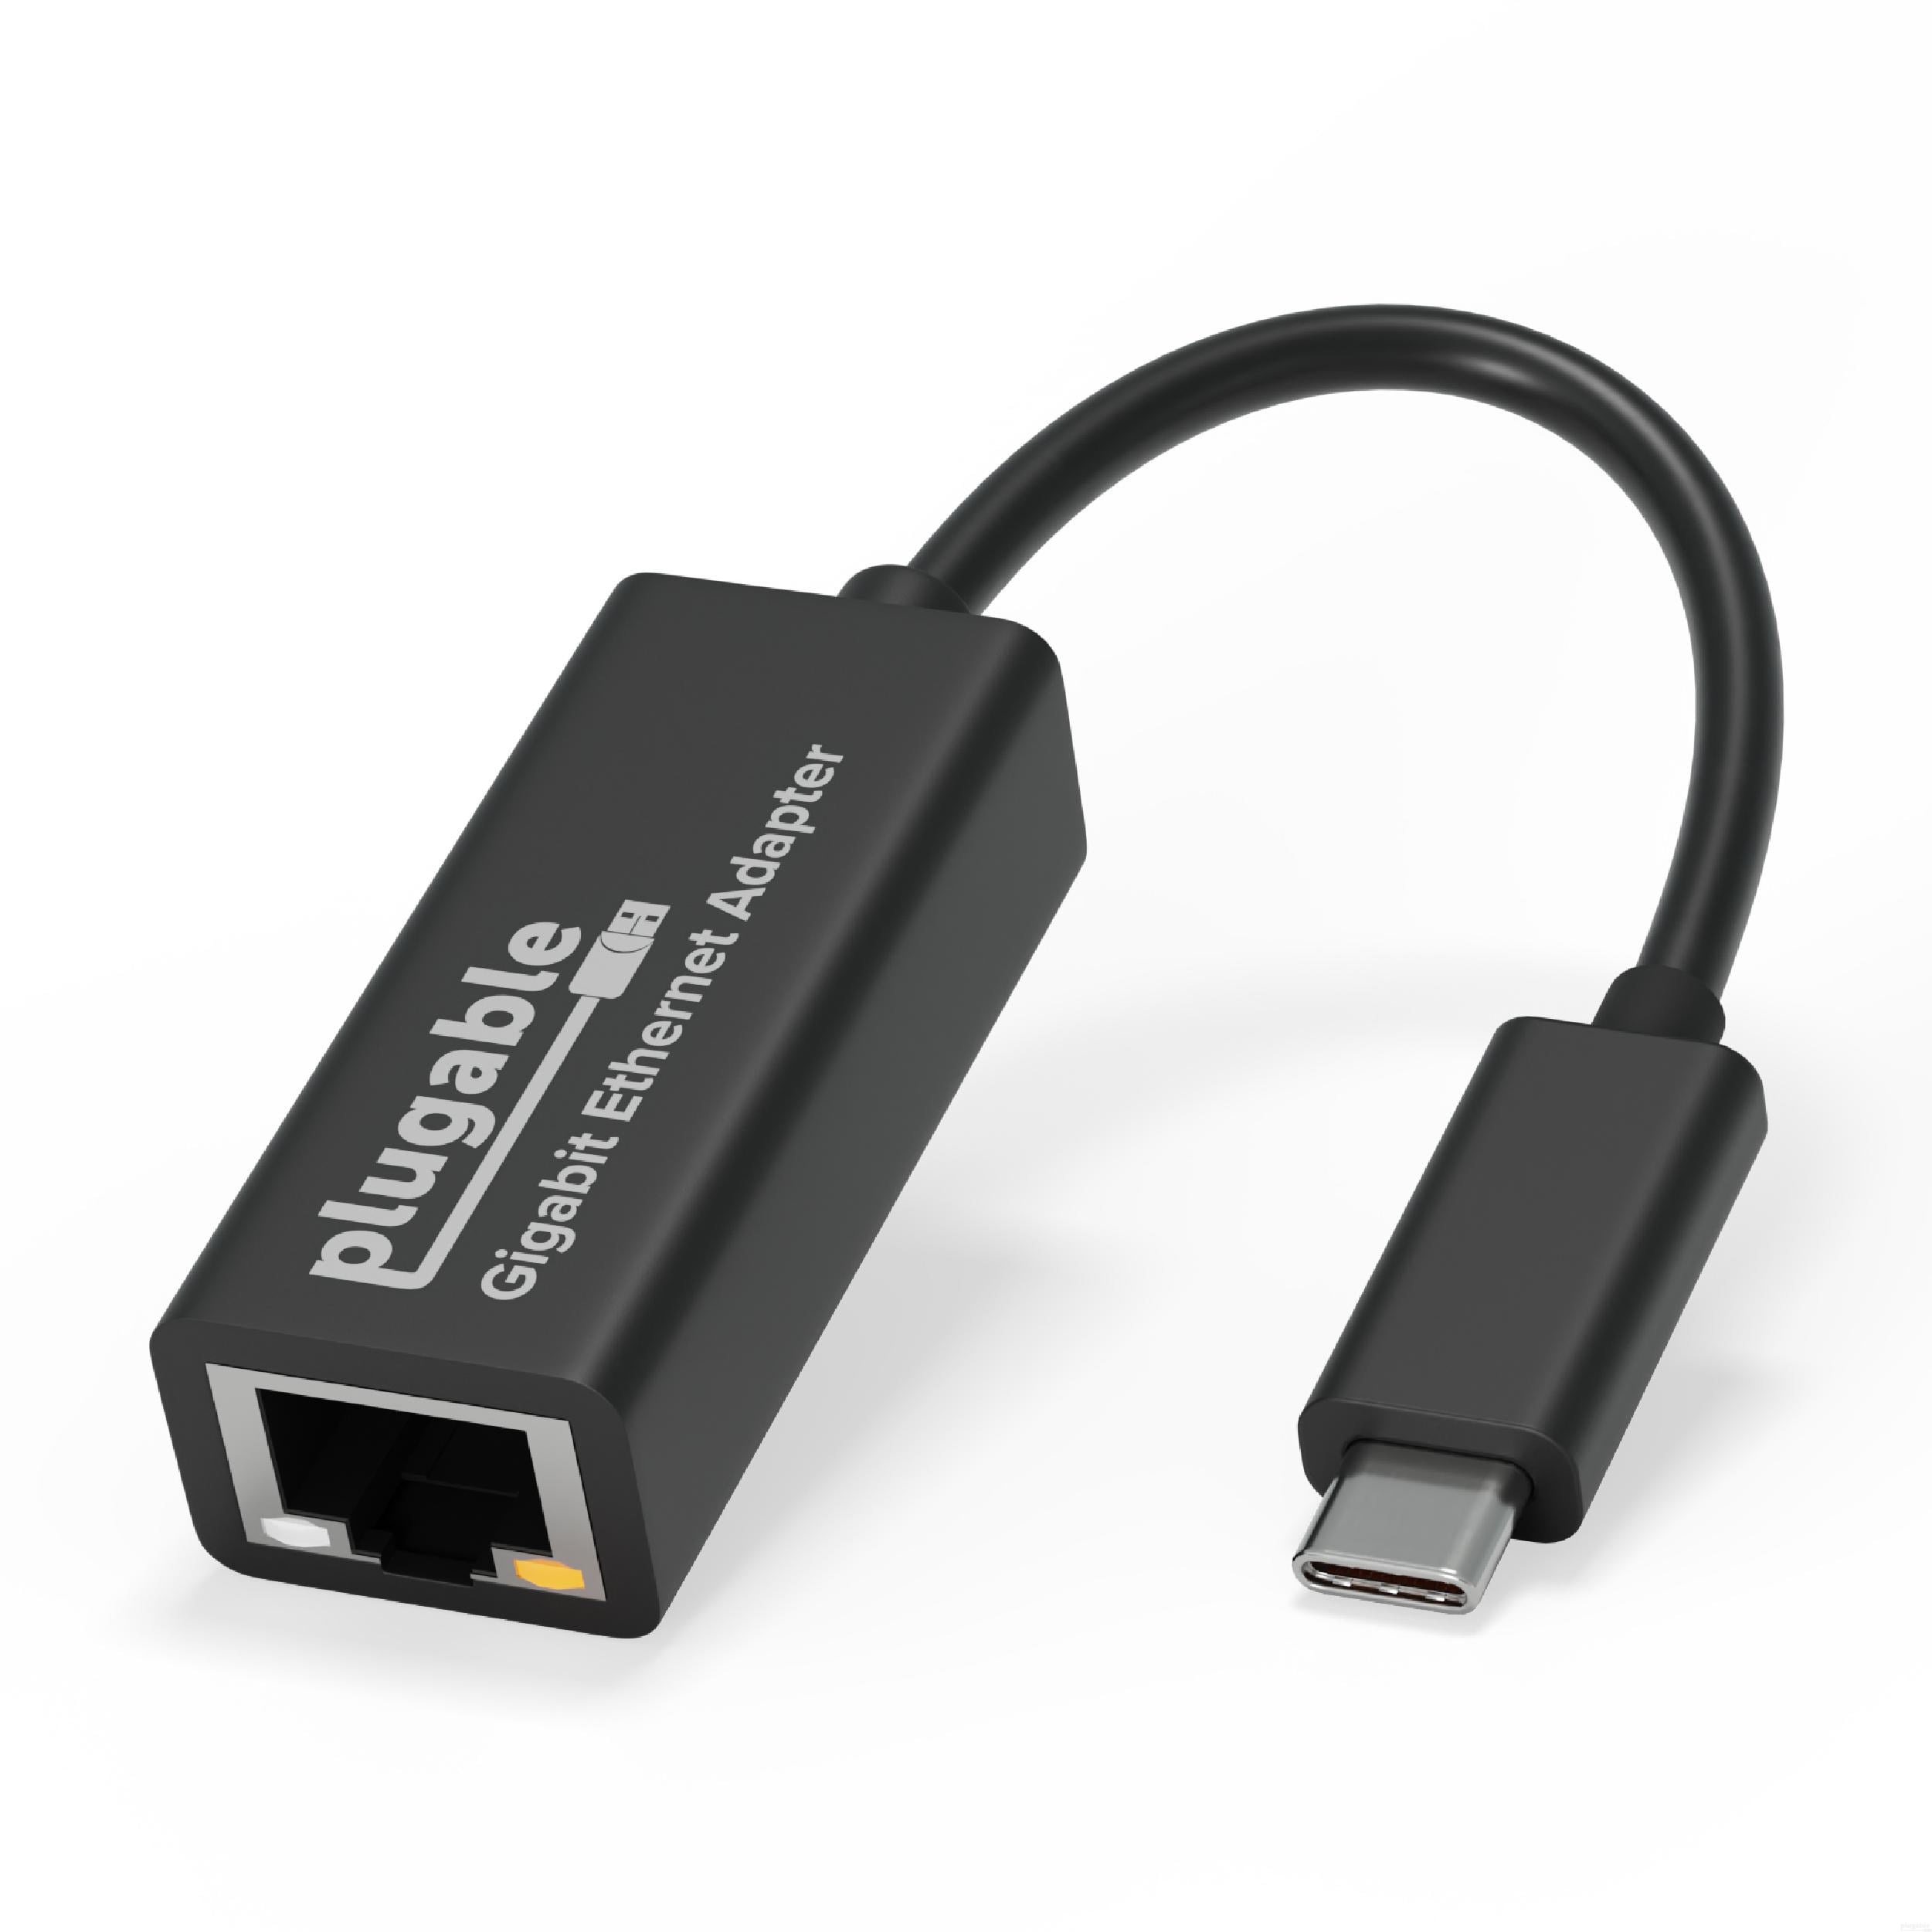 Plugable USB C to Ethernet Adapter, Fast and Reliable Thunderbolt or USB C  to Gigabit Ethernet Adapter, Compatible with Windows, Mac, iPhone 15